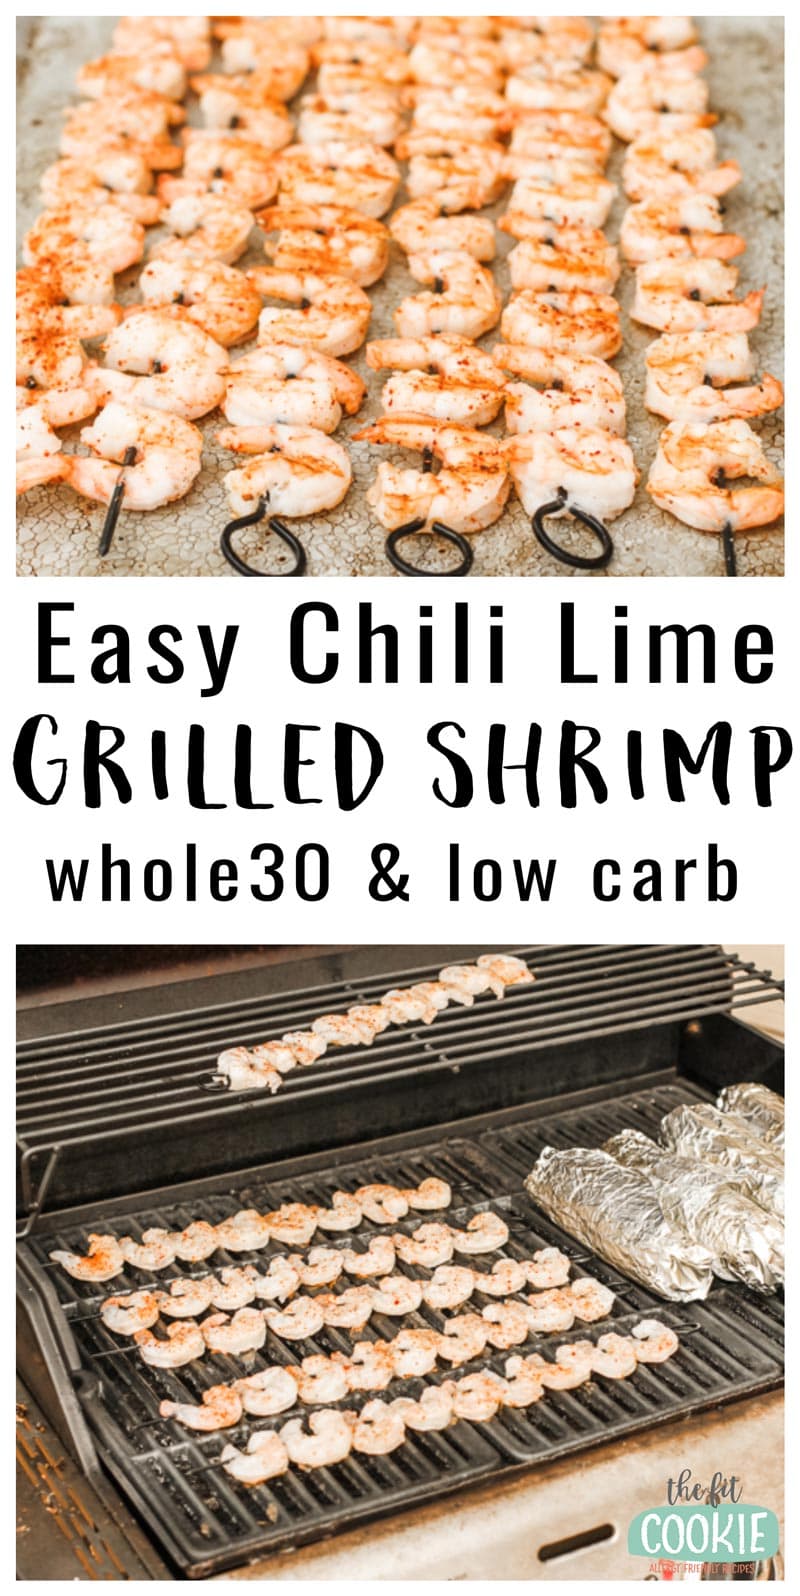 image collage of grilled shrimp on skewers on a grill